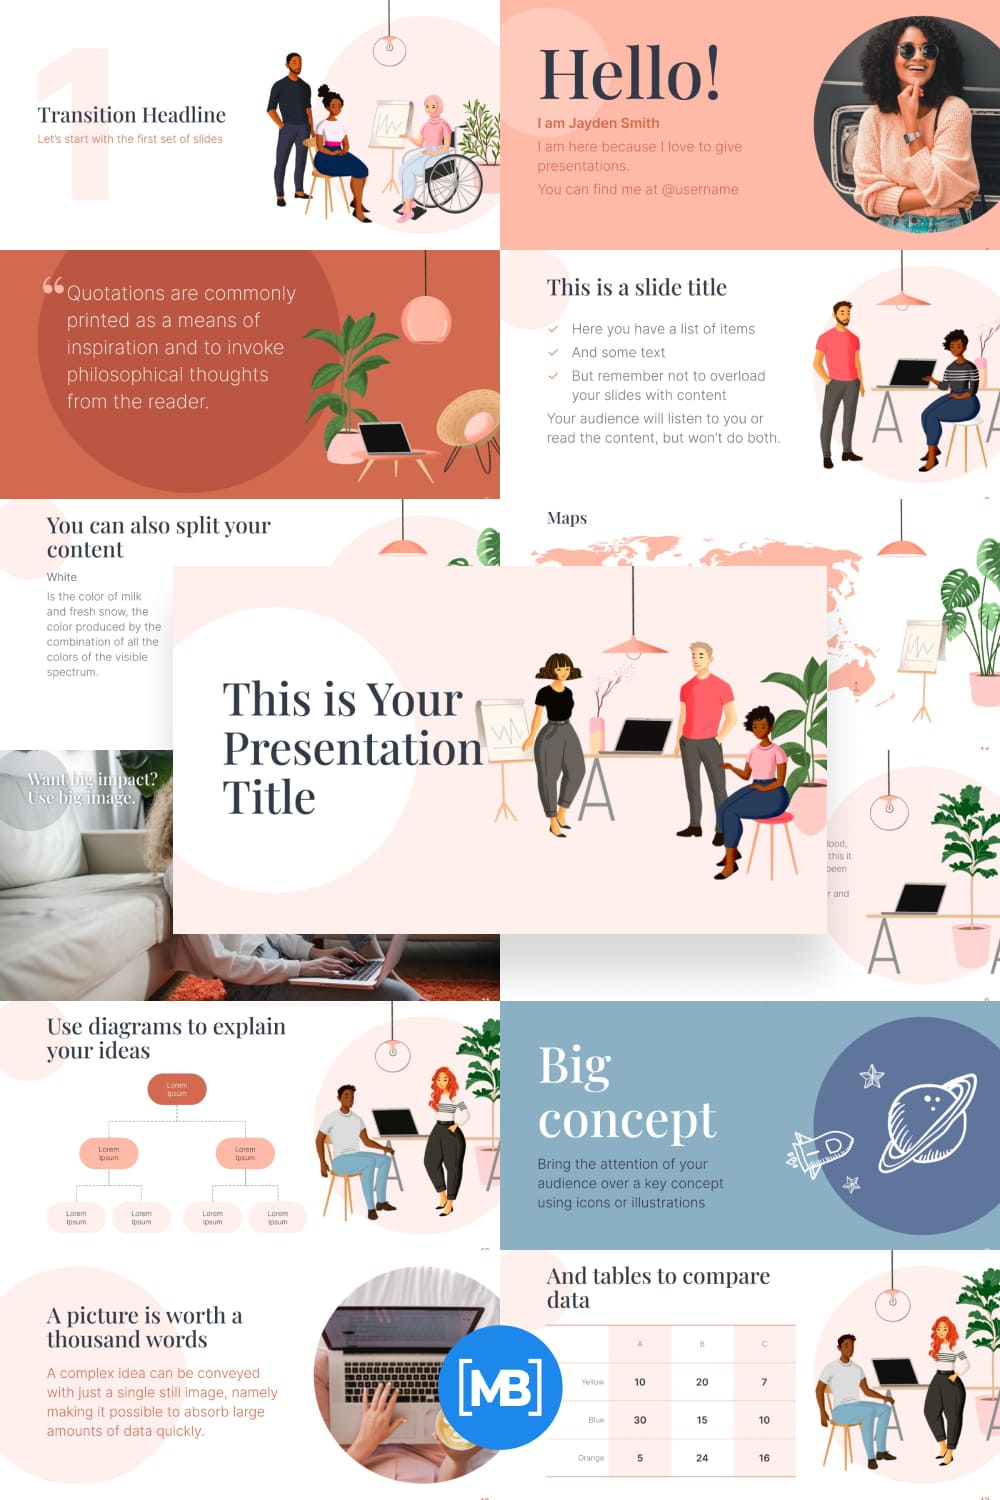 Cool illustrations and soft colors make this template aesthetically pleasing.